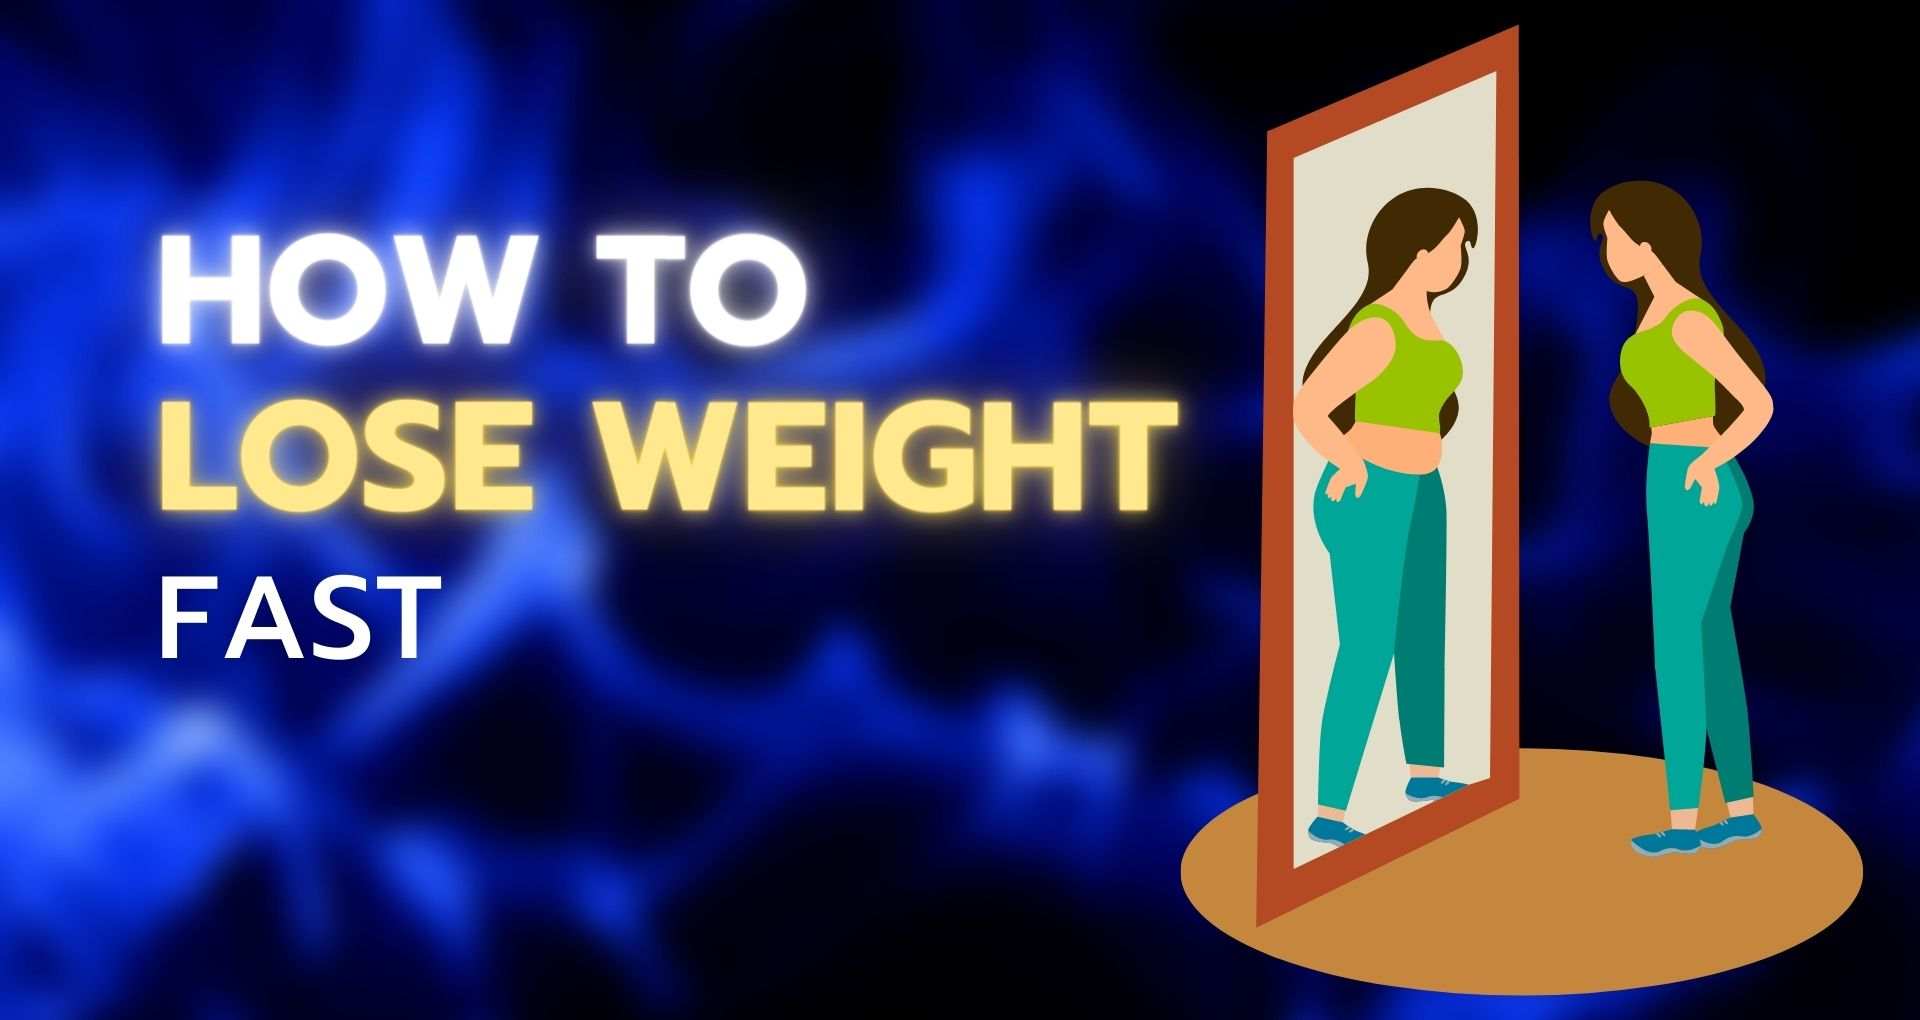 How to lose weight fast-infographic of slim women looking at fat women in mirror.